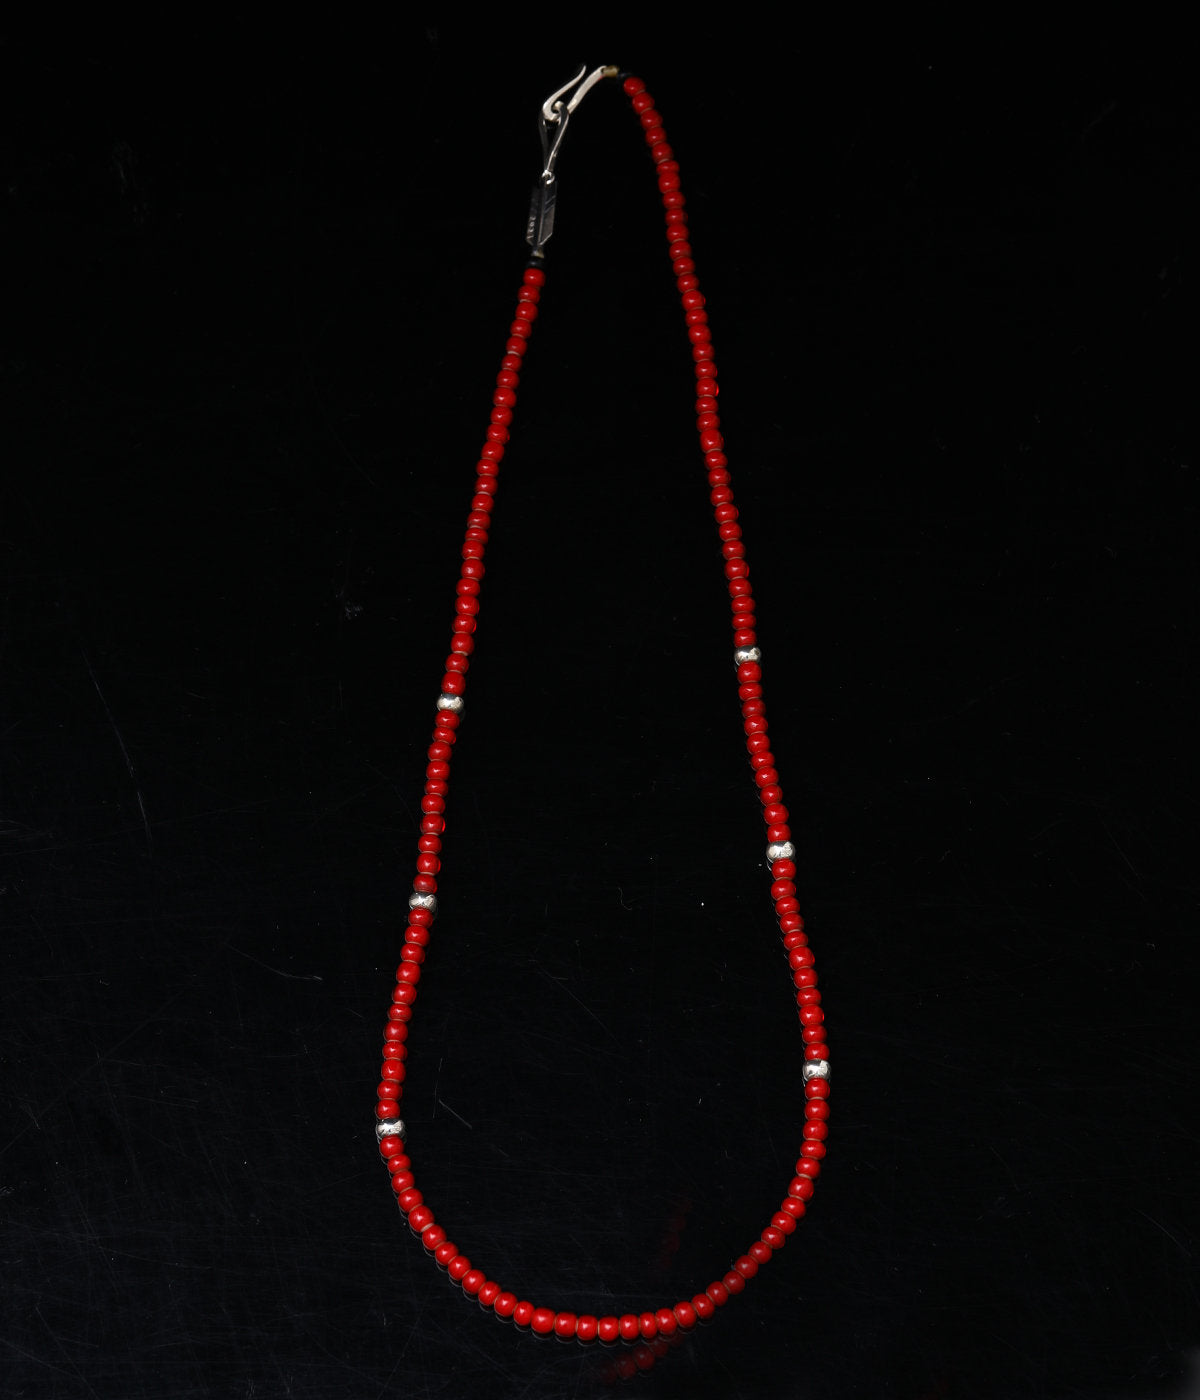 LARRY SMITH BEADS NECKLACE